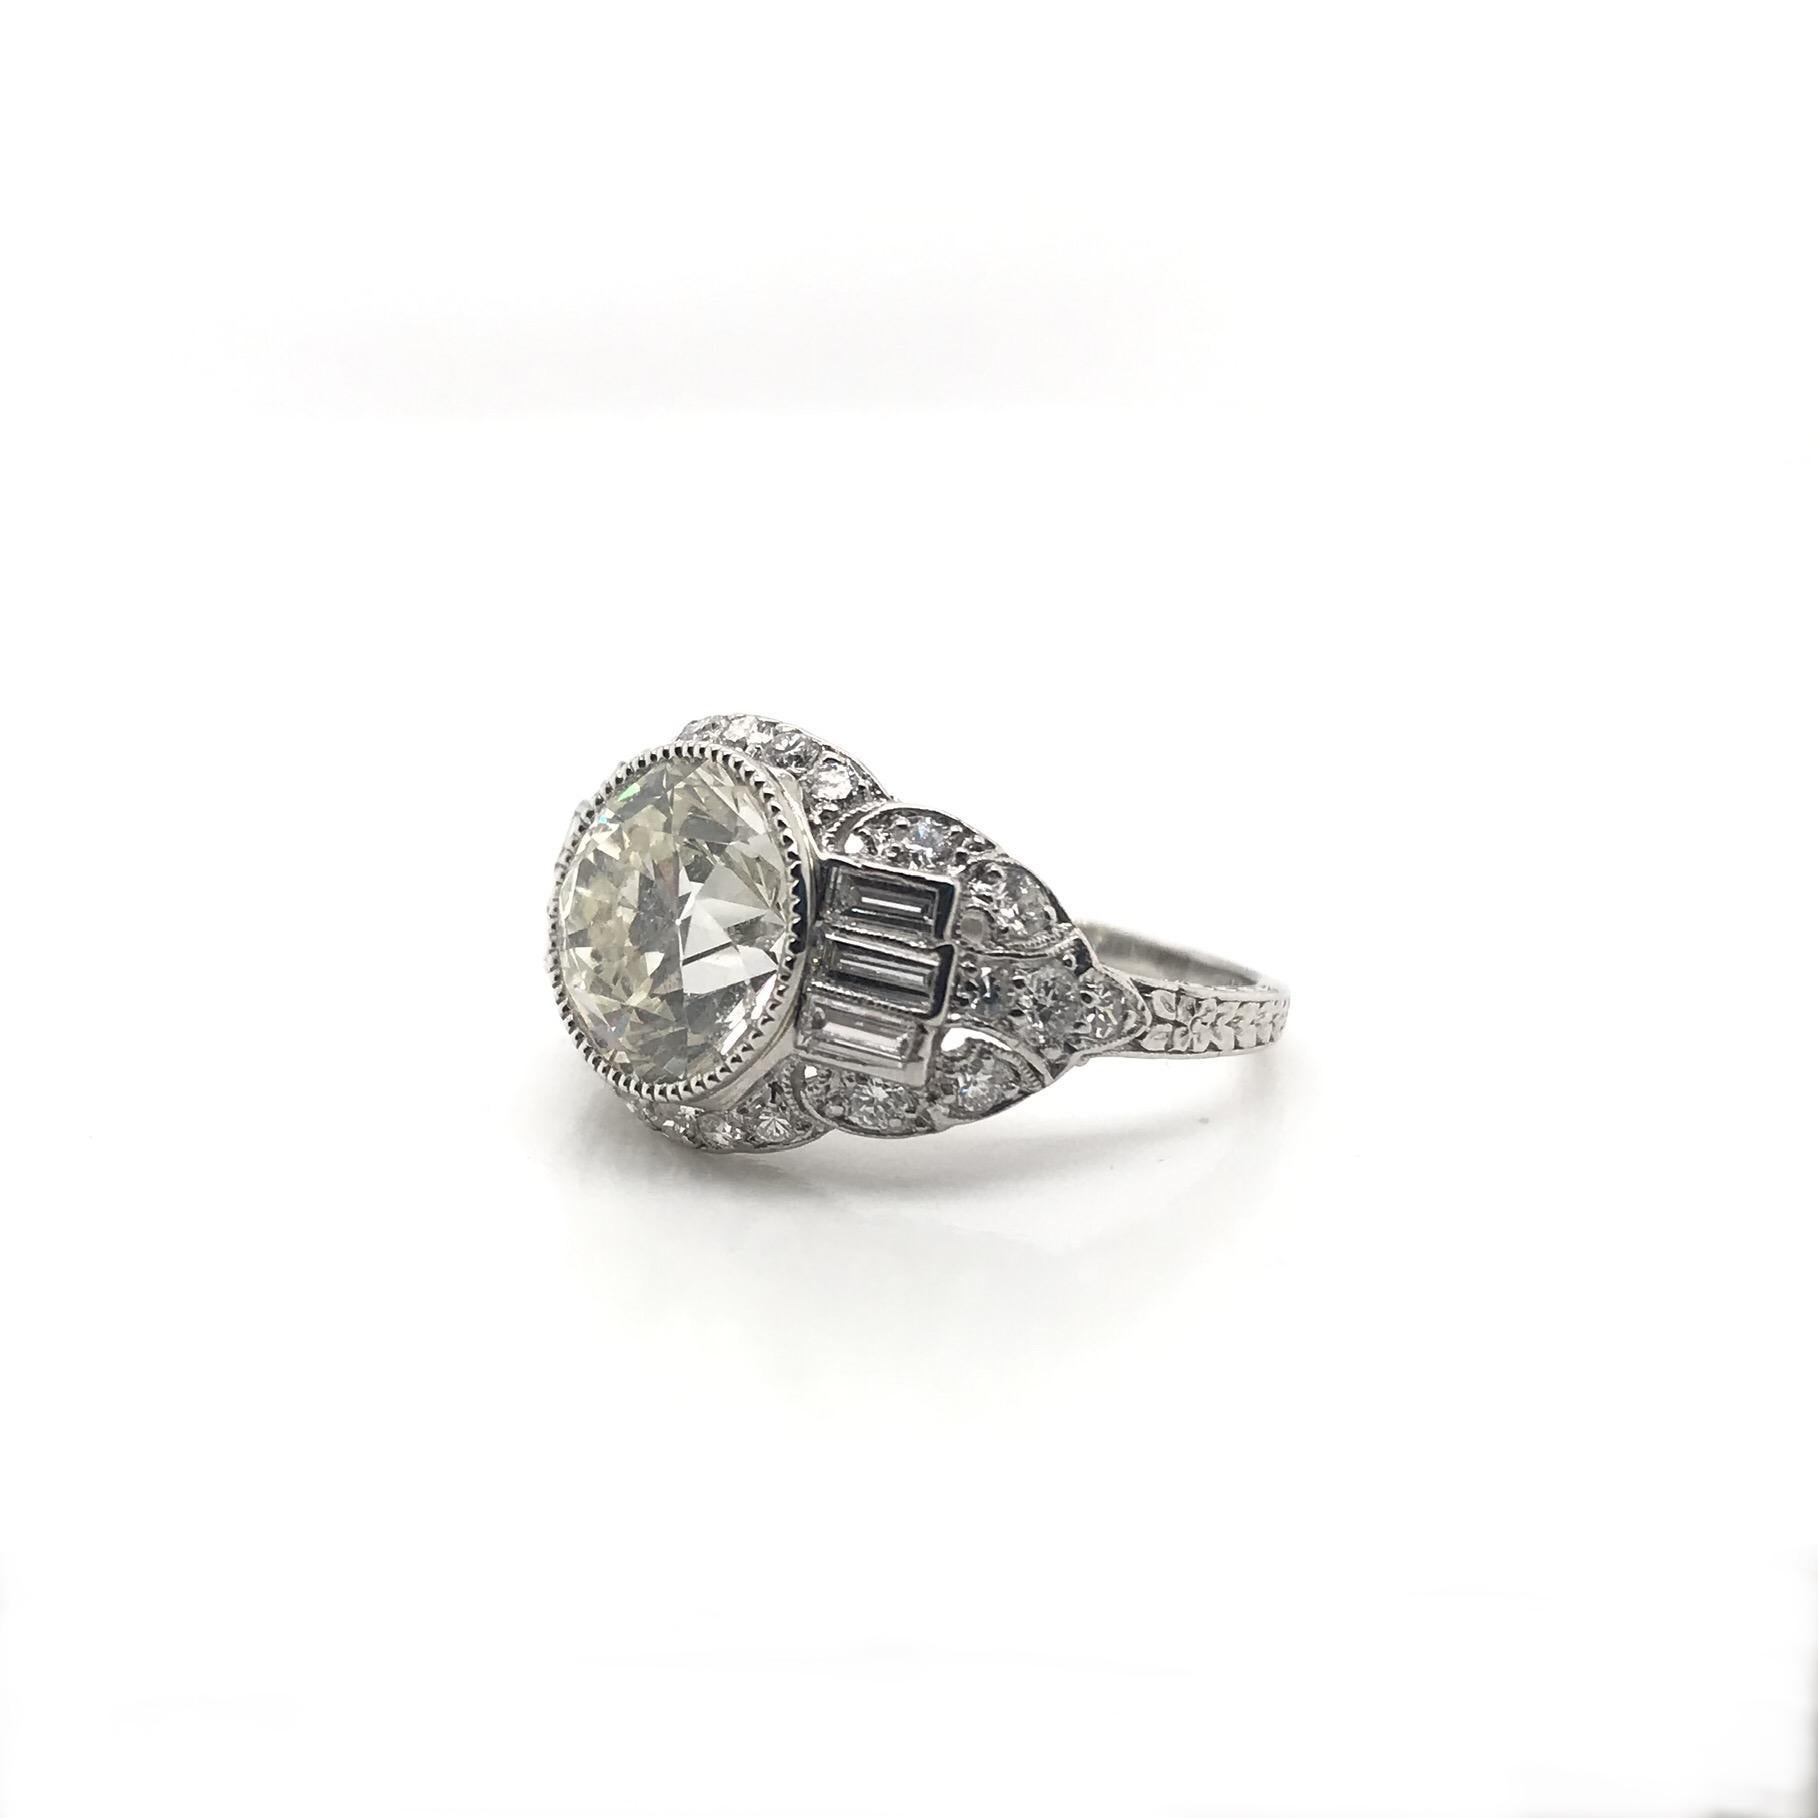 This exceptional antique piece was crafted sometime during the Art Deco design period (1920-1940). The center diamond is an antique Old European cut measuring approximately 3.20 carats. The center diamond grades approximately L in color and VS2 in